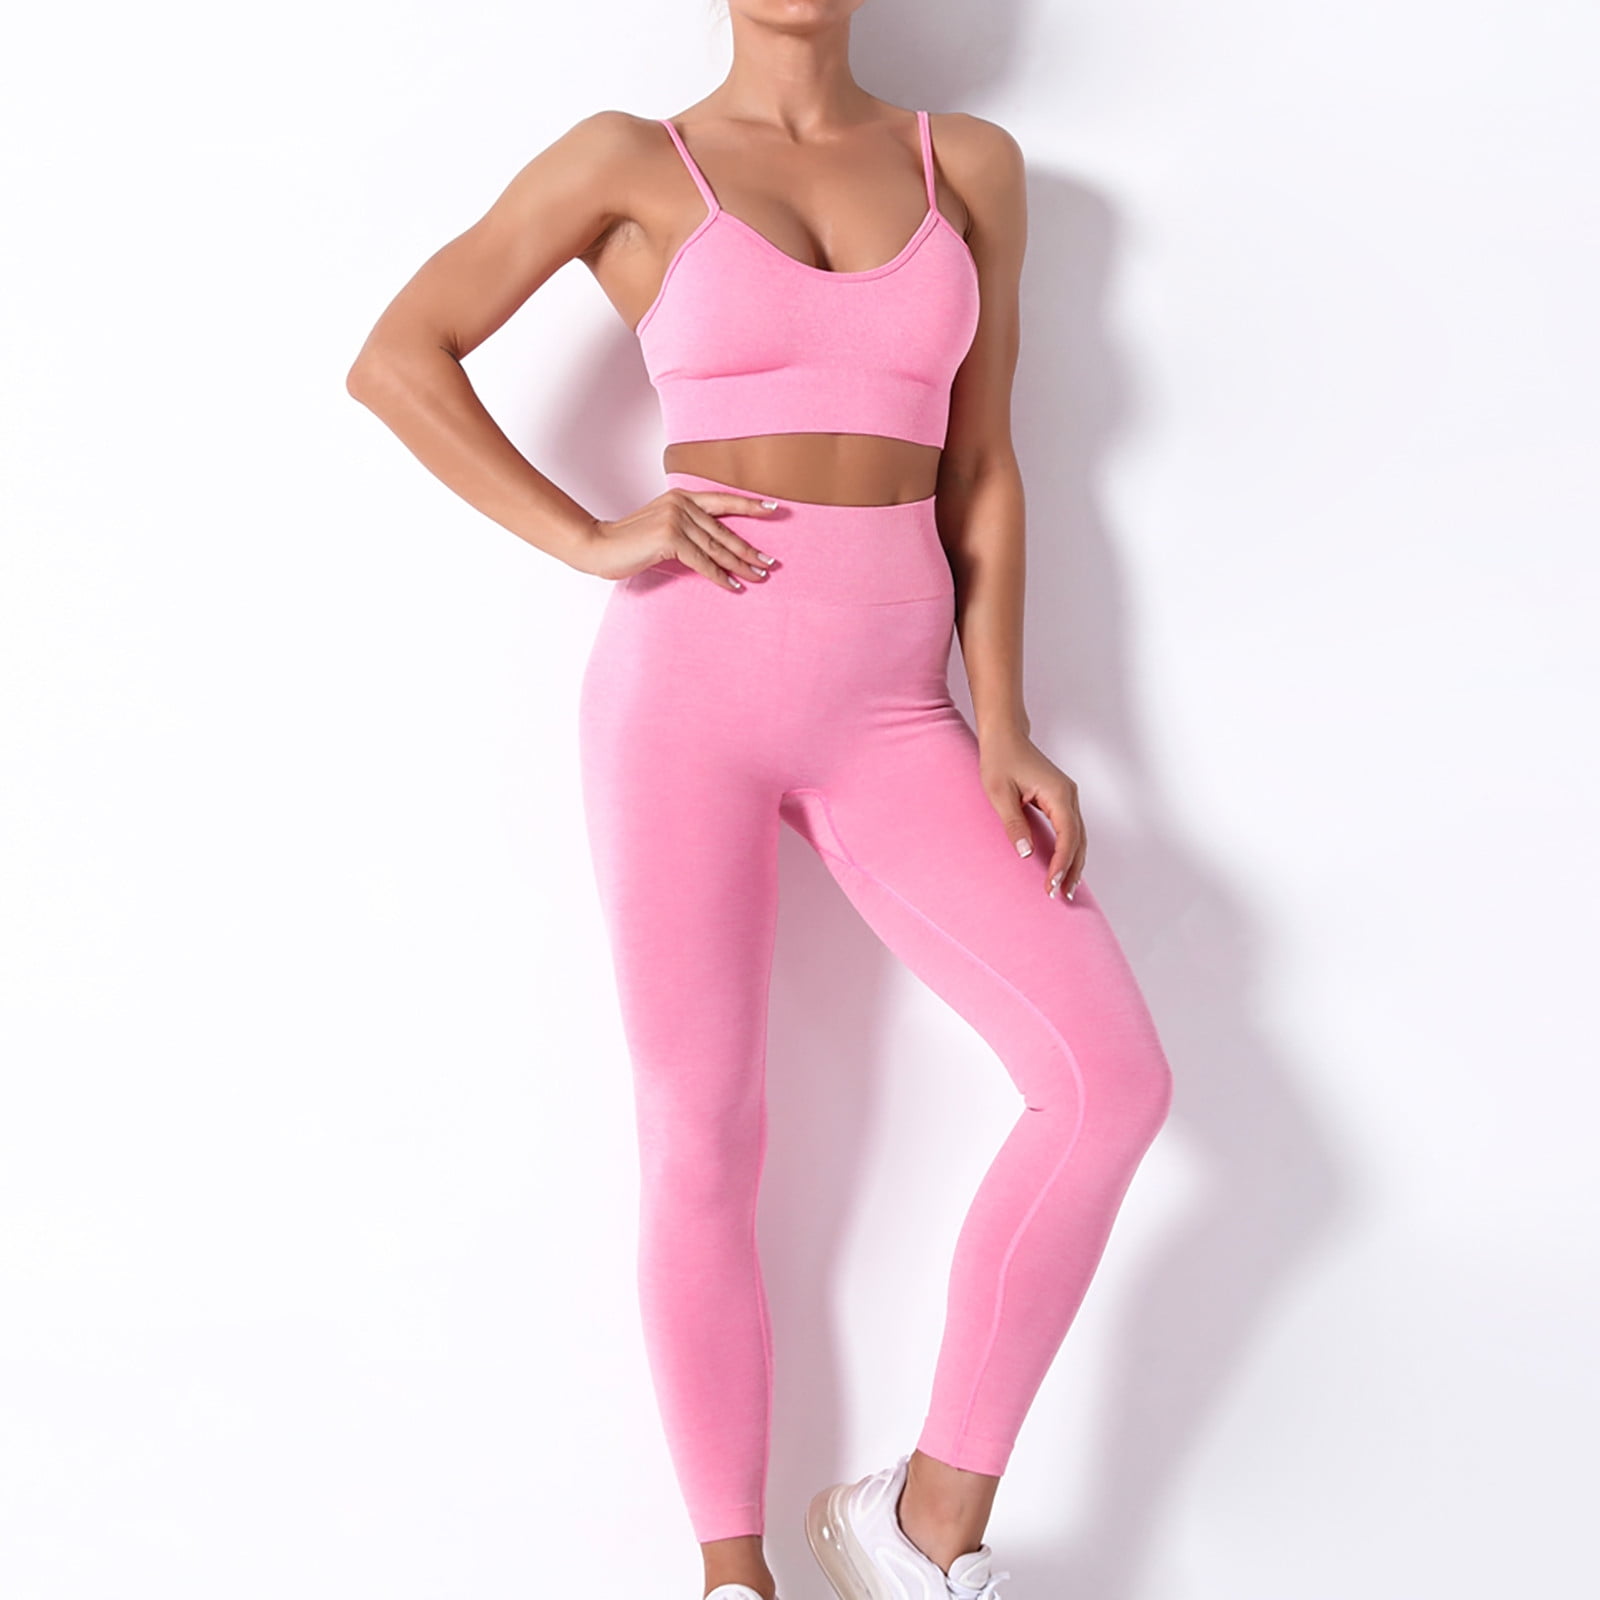 JNGSA Yoga Workout Outfits for Women 11 PieceSeamless Sports Exercise Sets Sports  Bras with Legging Pants Fitness Running Yoga Set Hot Pink 8 Clearance 